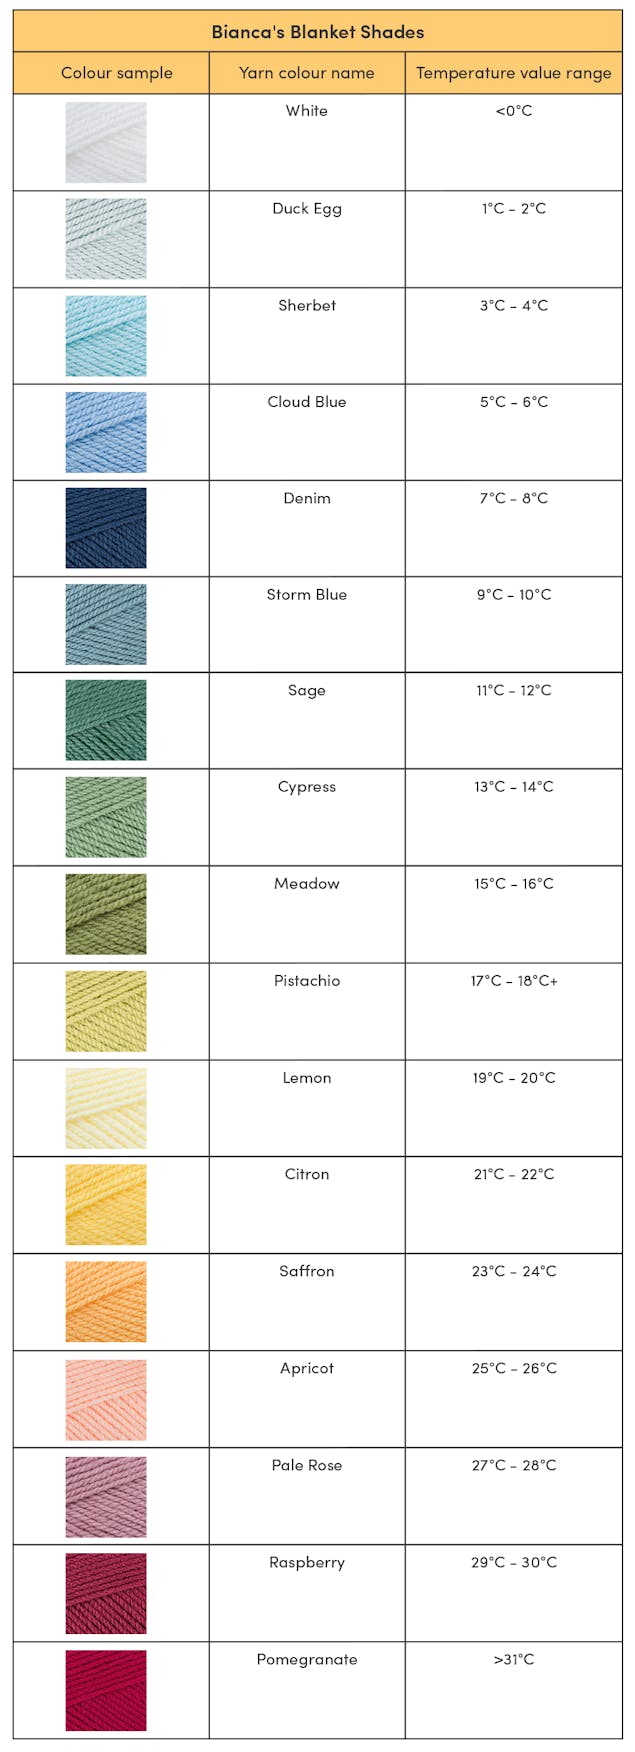 Yarn shades labelled by temperature range 